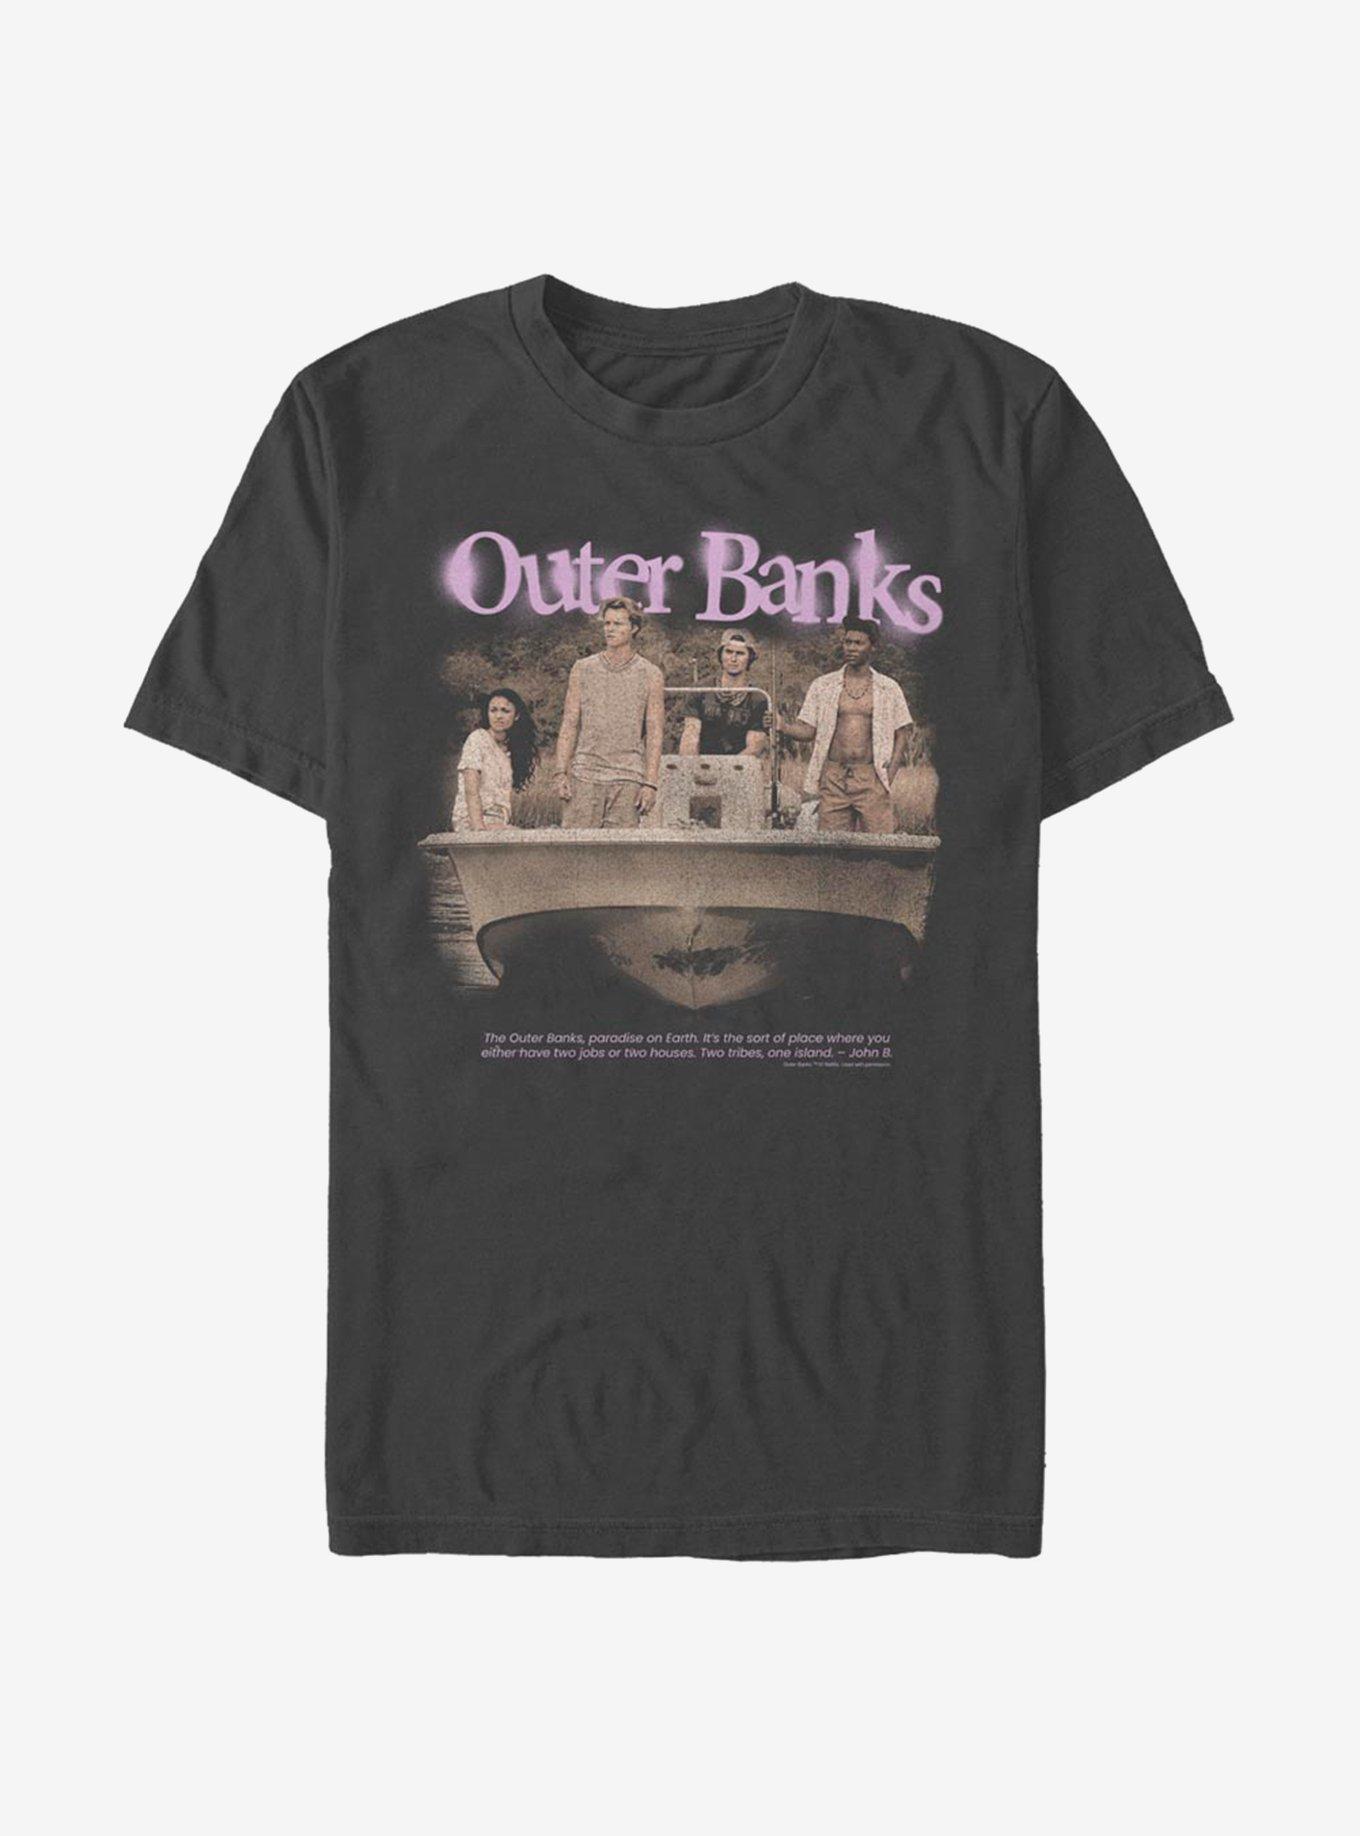 Outer Banks OBX Spraypaint T-Shirt, CHARCOAL, hi-res